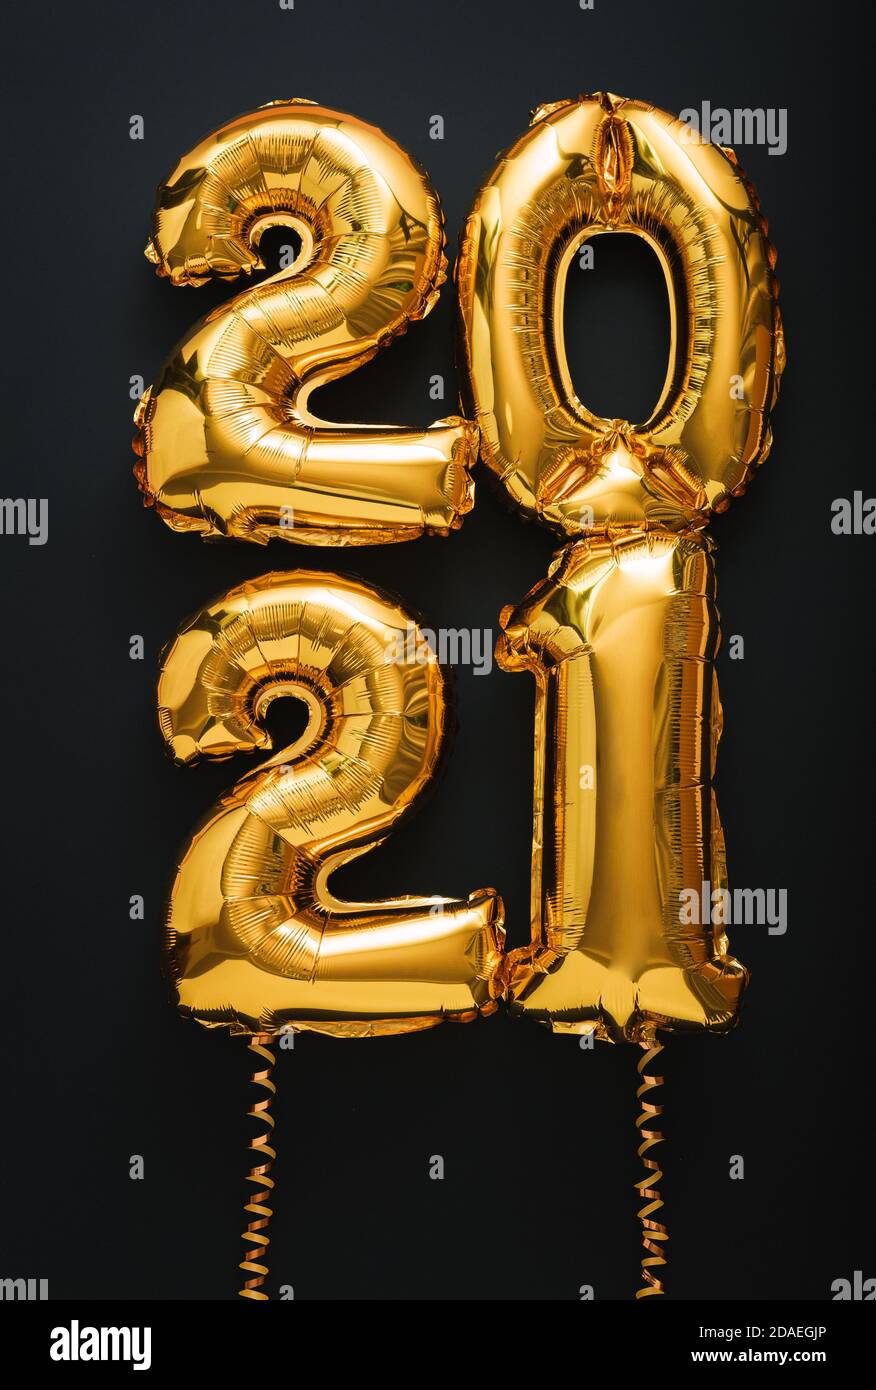 2021 air balloon gold text with ribbons on black background. Happy New year eve invitation with Christmas gold foil balloons 2021. vertical. Stock Photo